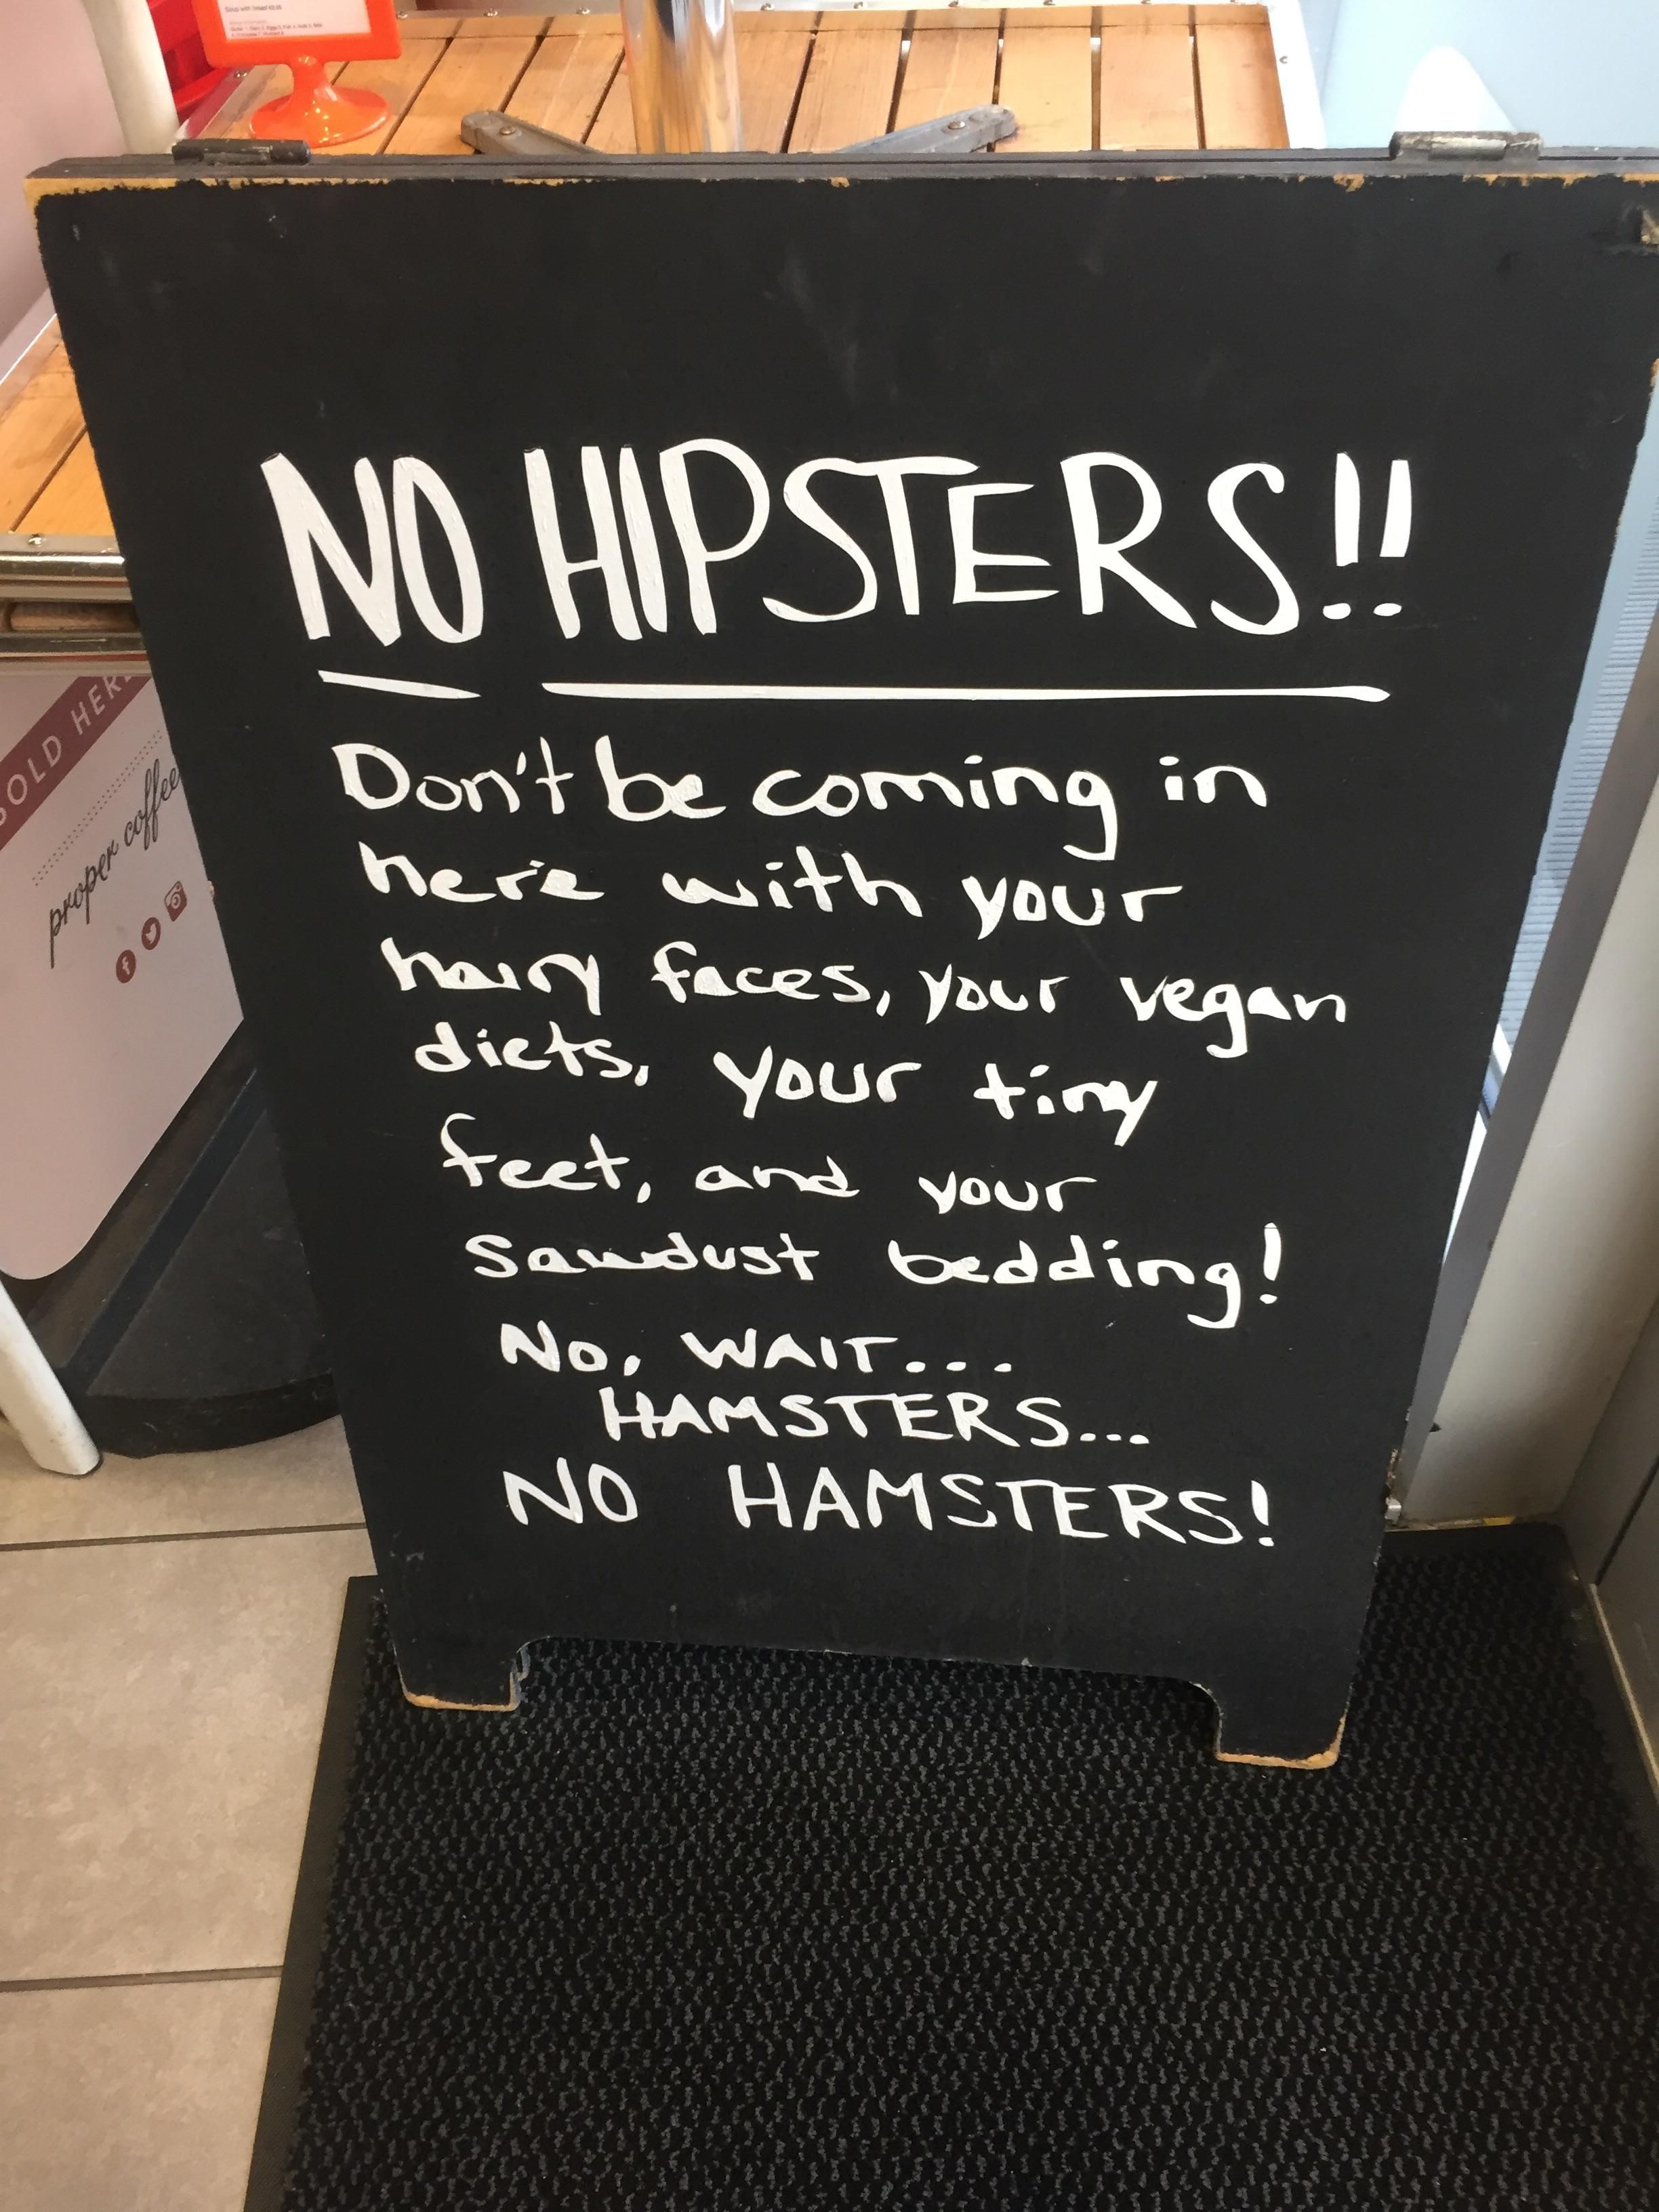 Seen this at a local coffee shop